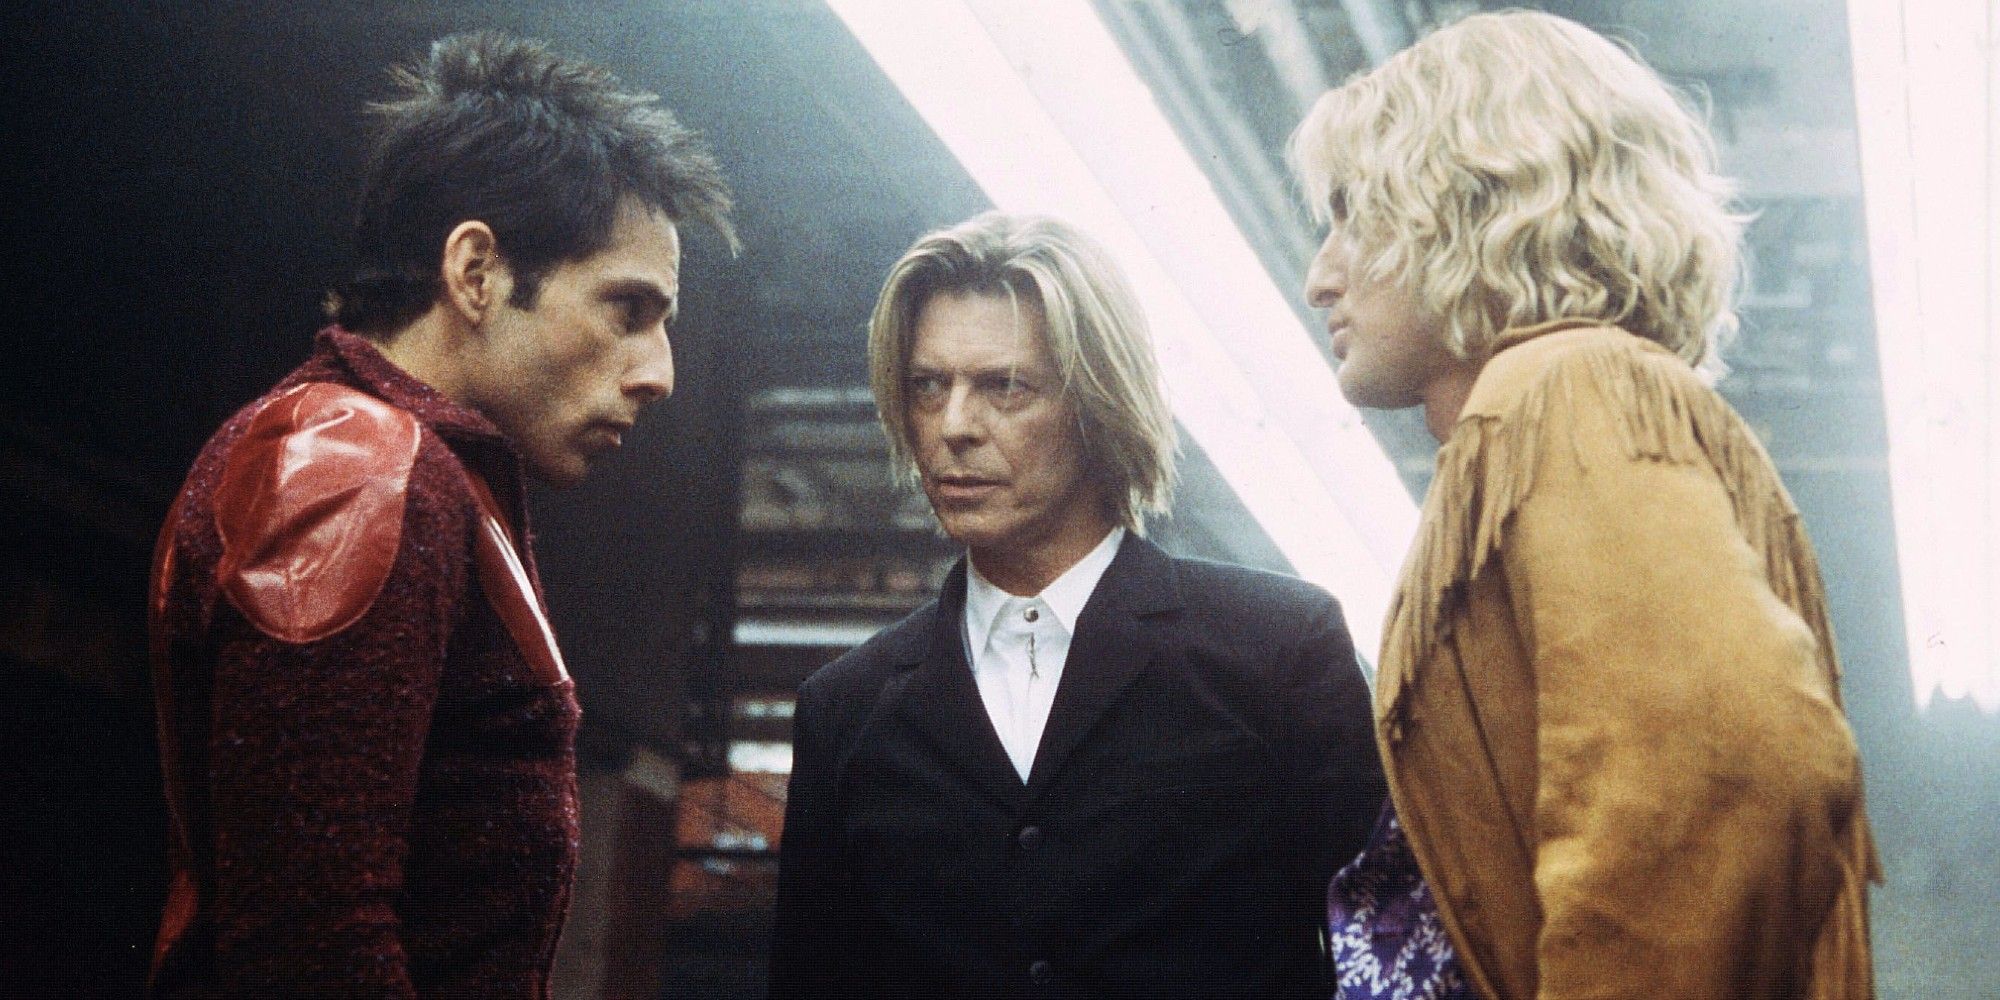 David Bowie and two male models discuss the terms of the fashion show competition. 